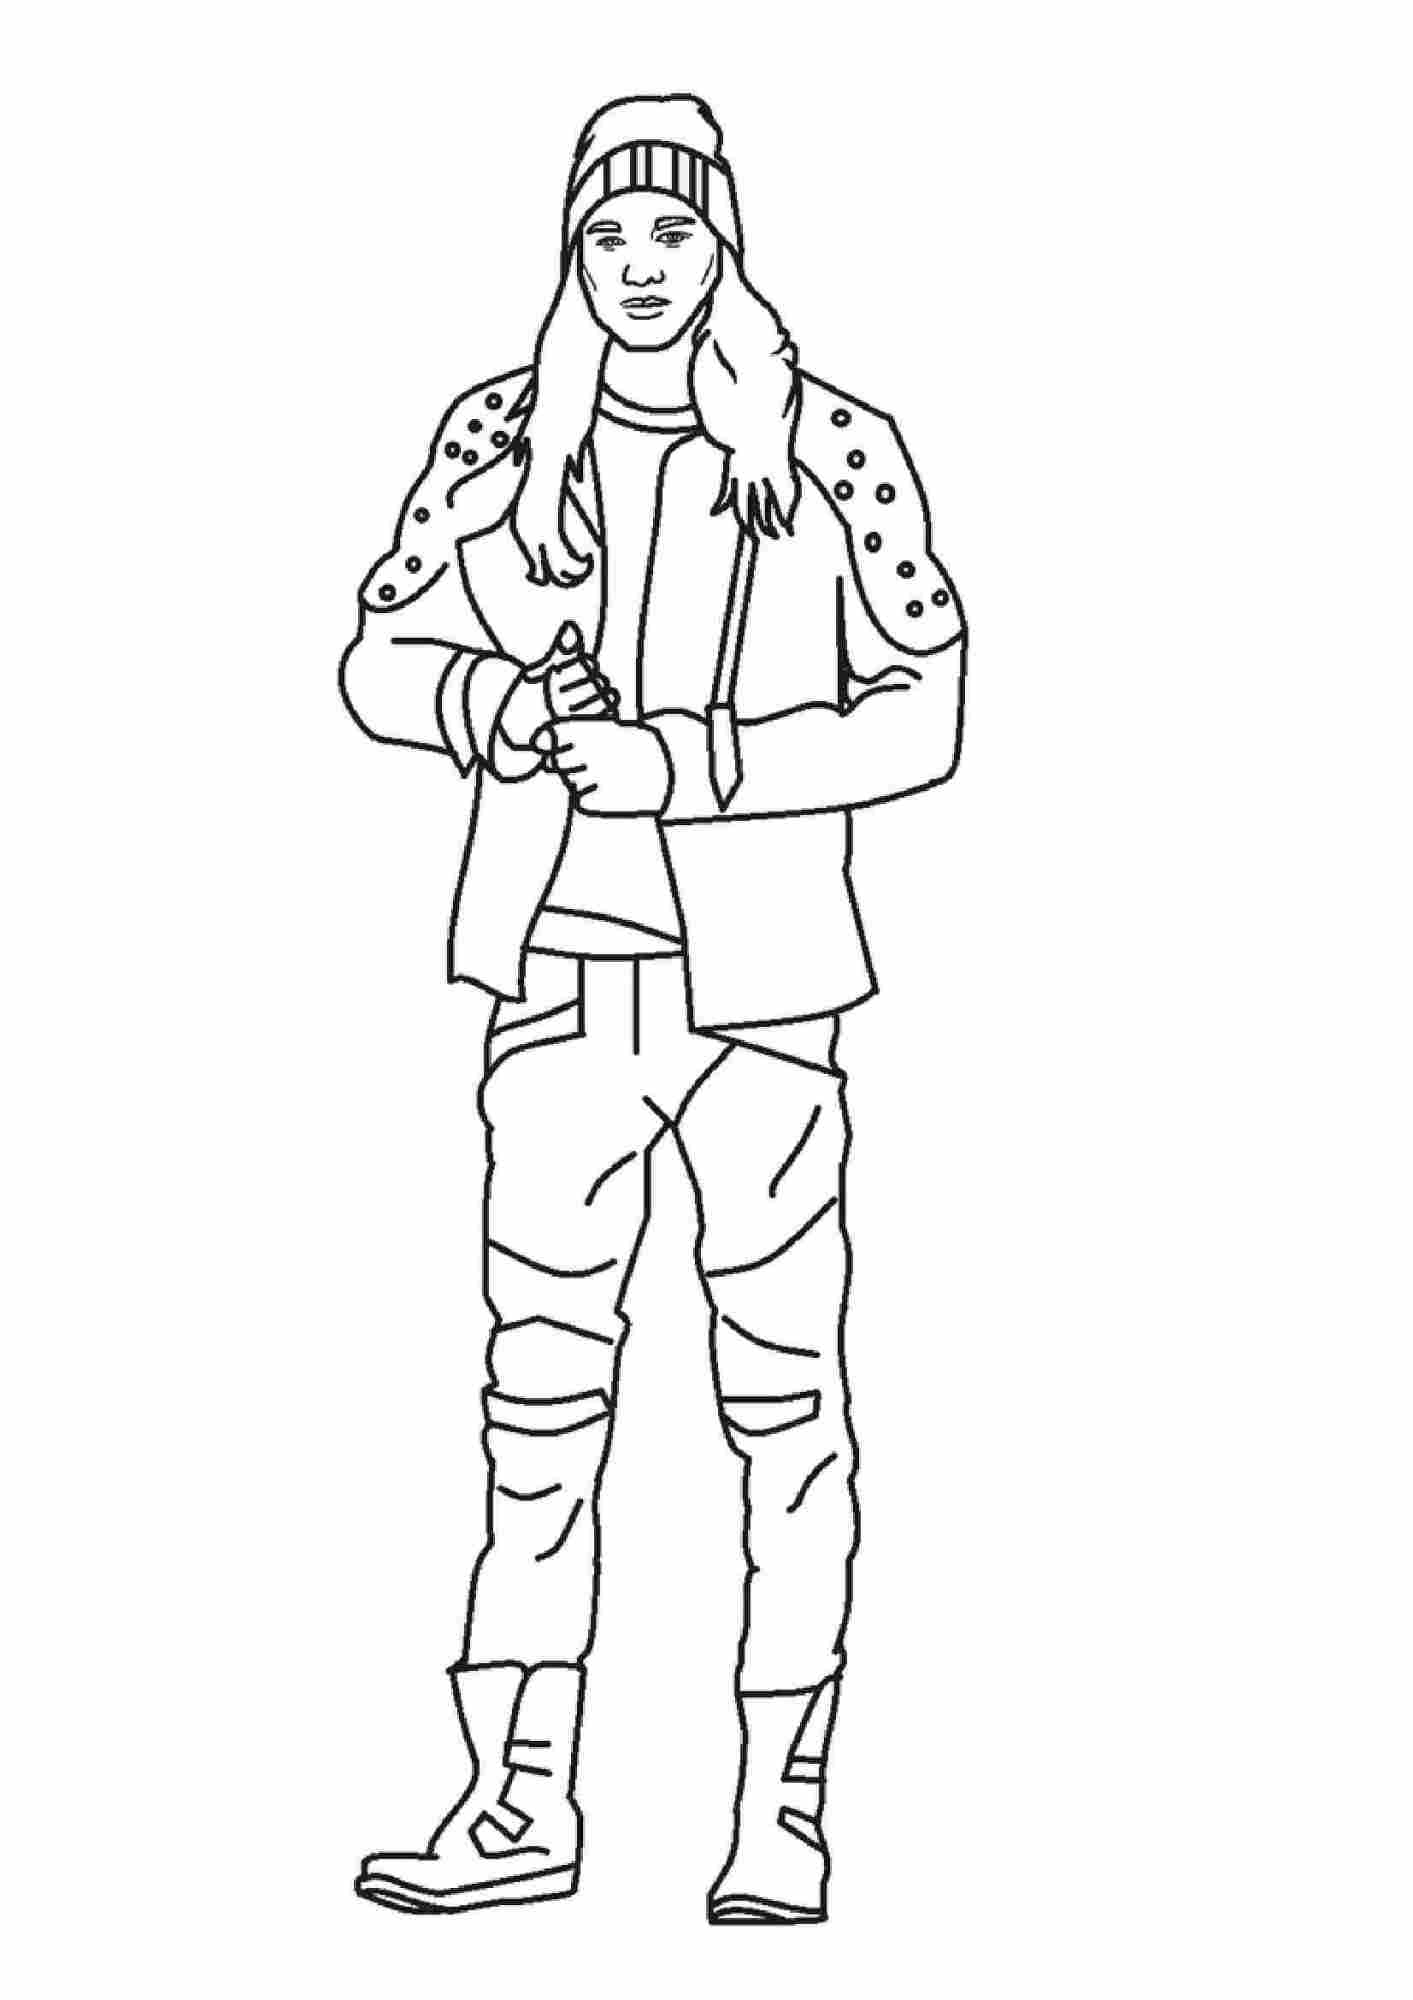 Jay from Descendants 2, quick-witted boy with charm to spare Coloring Page